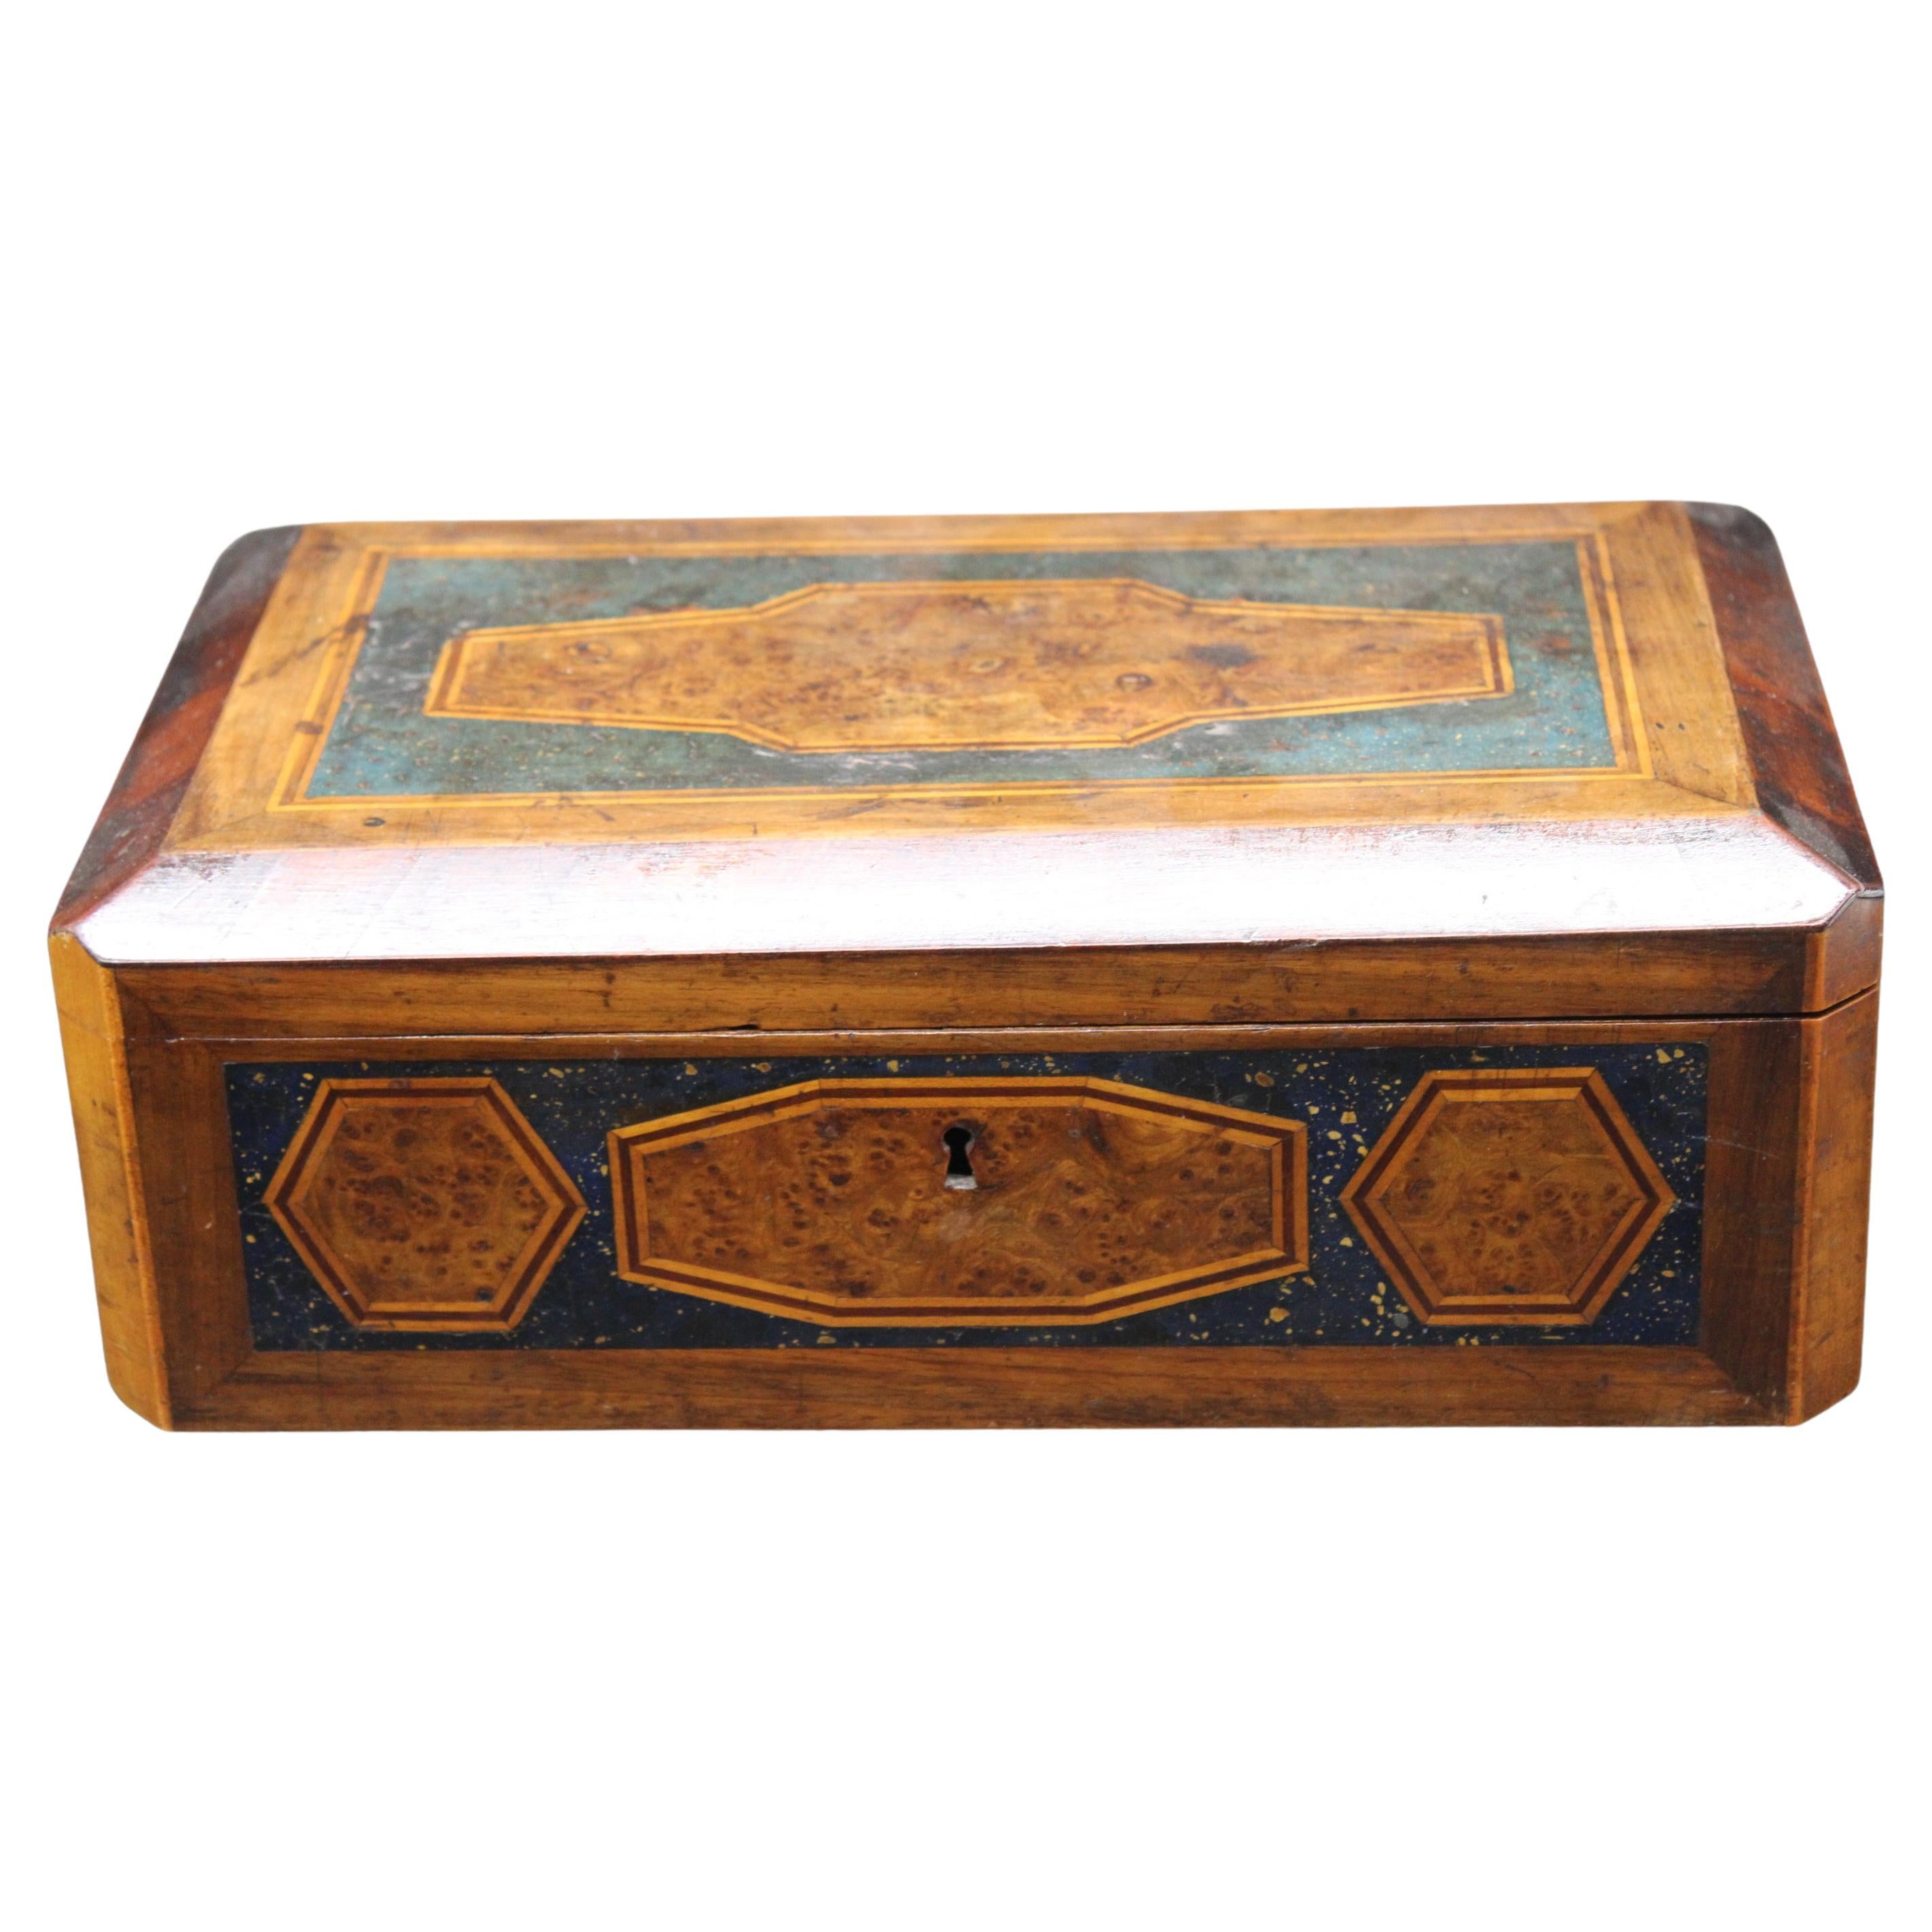 Antique  French marquetry Jewelery box, french inlaid box, antique box